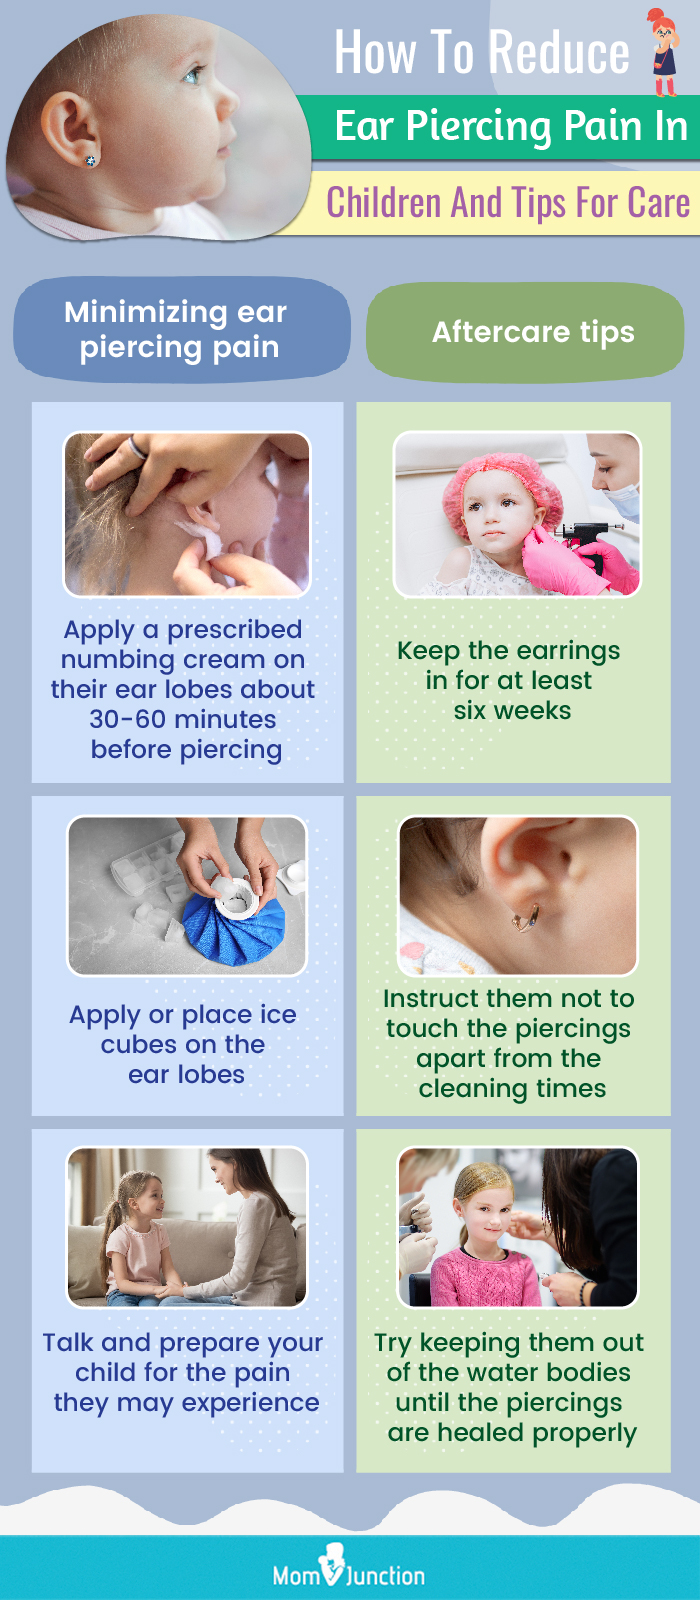 how to reduce ear piercing pain in children tips for care (infographic)